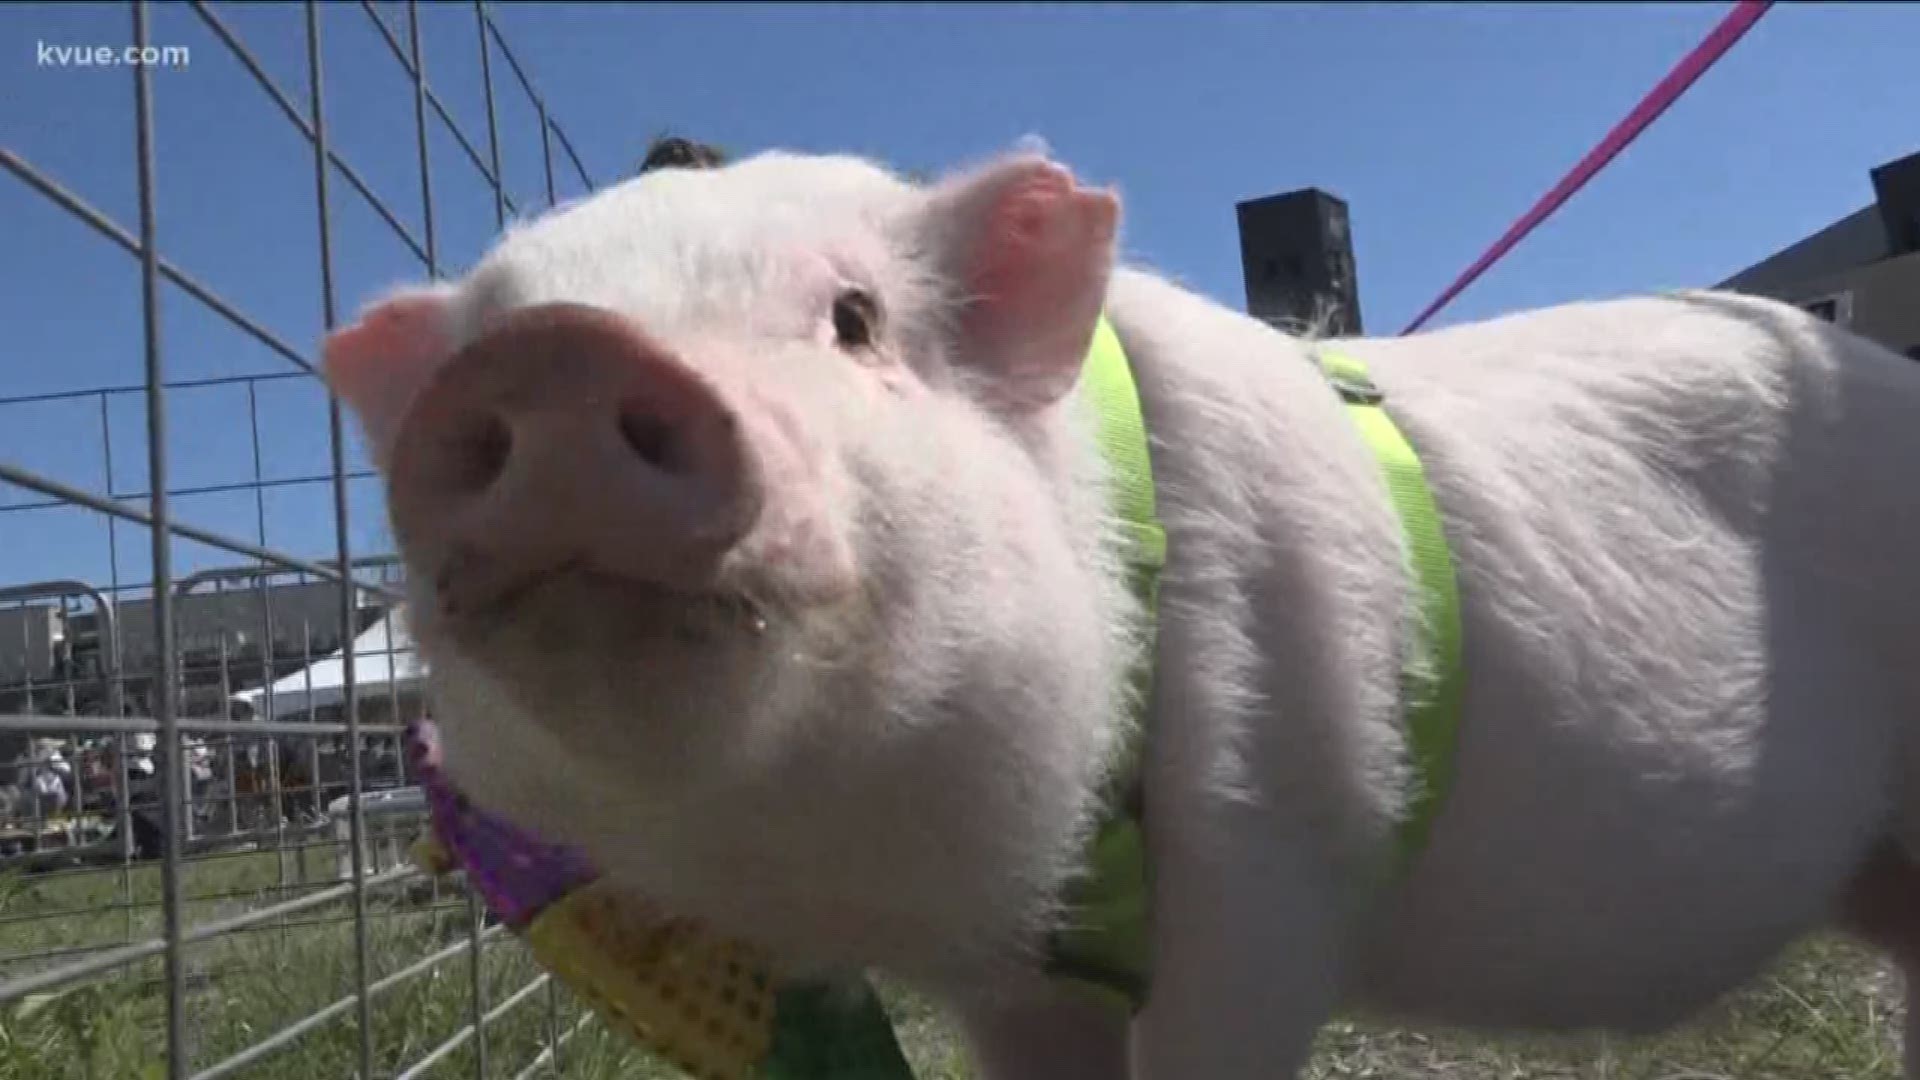 Central Texas Pig Rescue hopes the event will help educate the public about the animals.